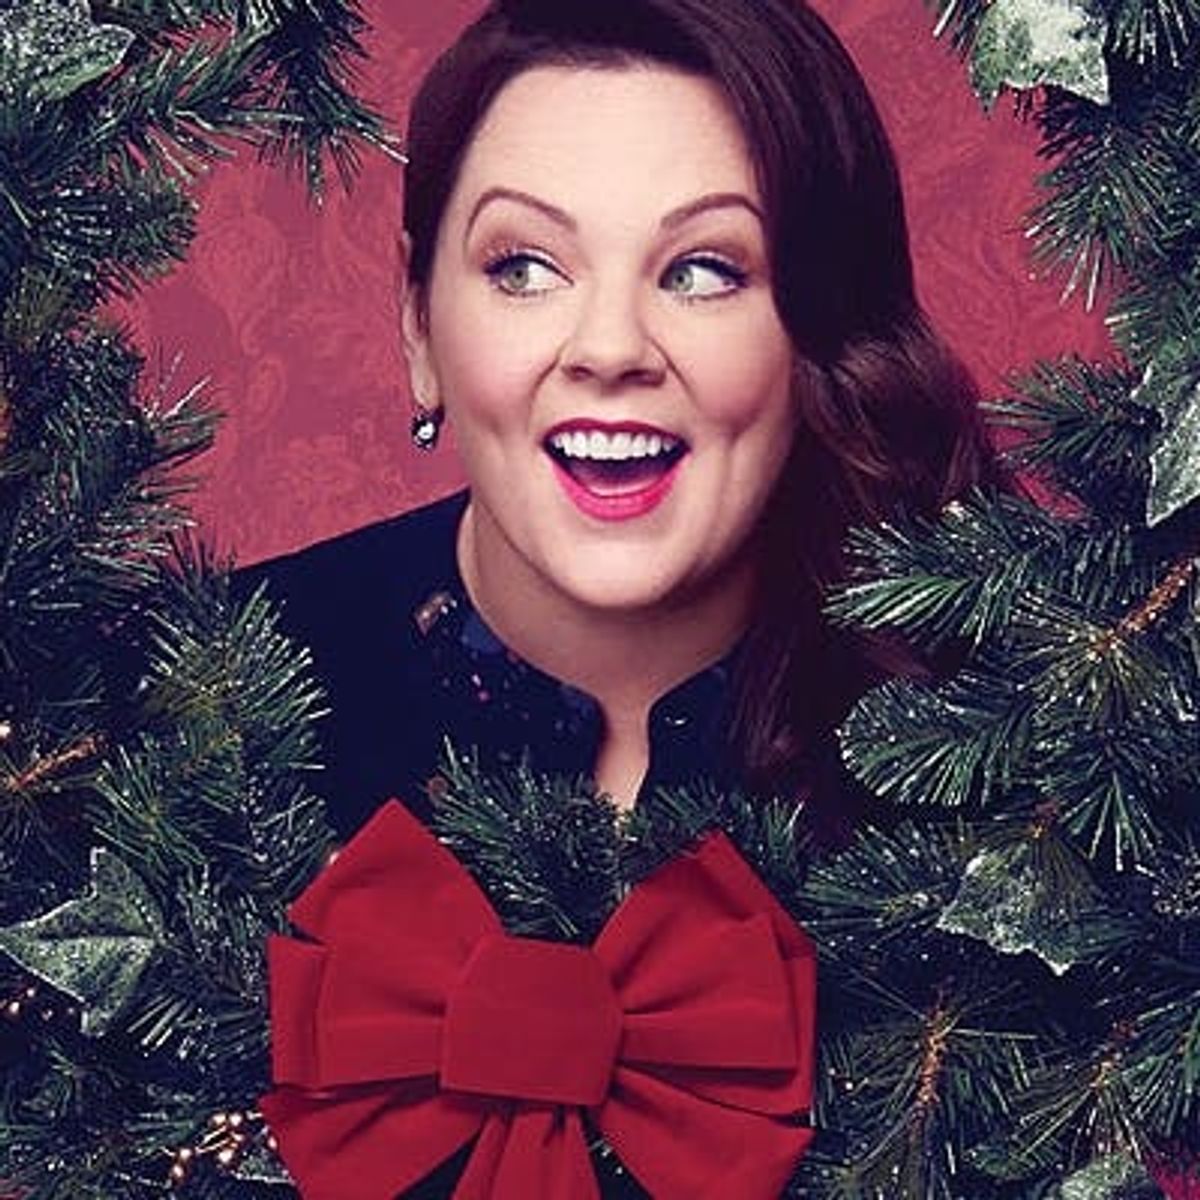 See Melissa McCarthy’s New Holiday Collection at Lane Bryant